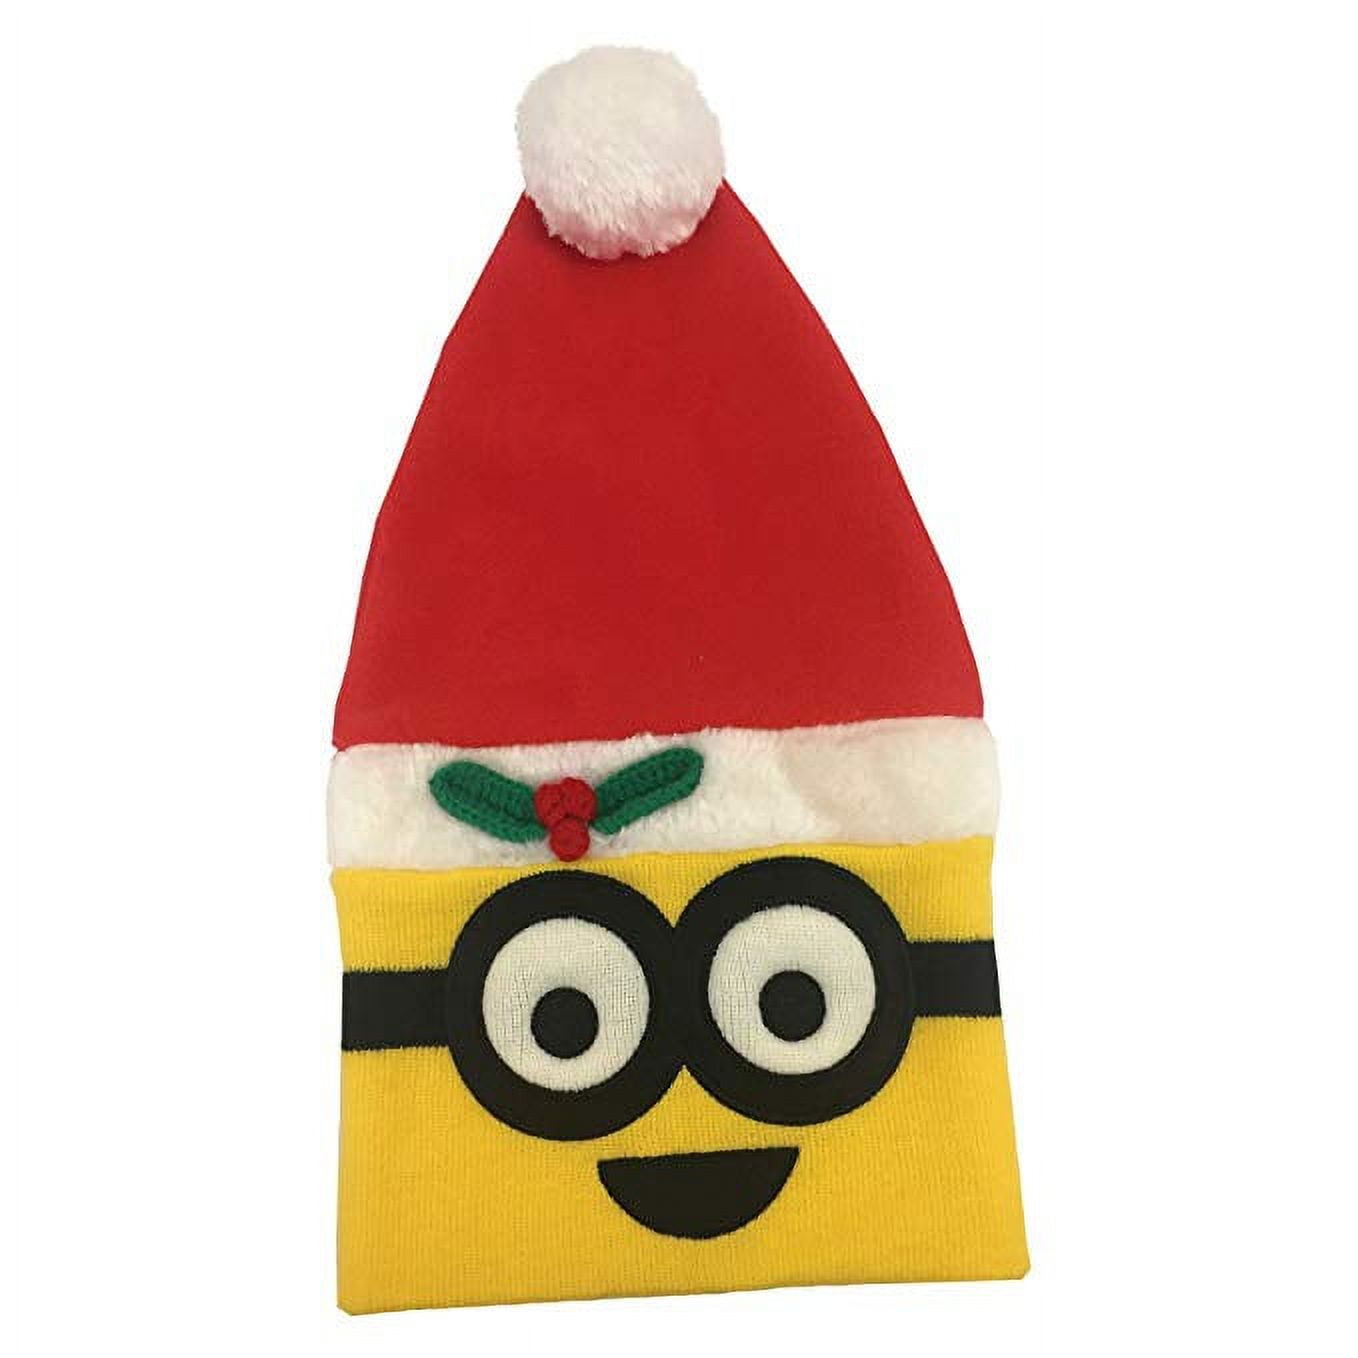 Minion Figures Circular Goggles Glasses + Kids Adult Yellow Beanie Hat  Unisex